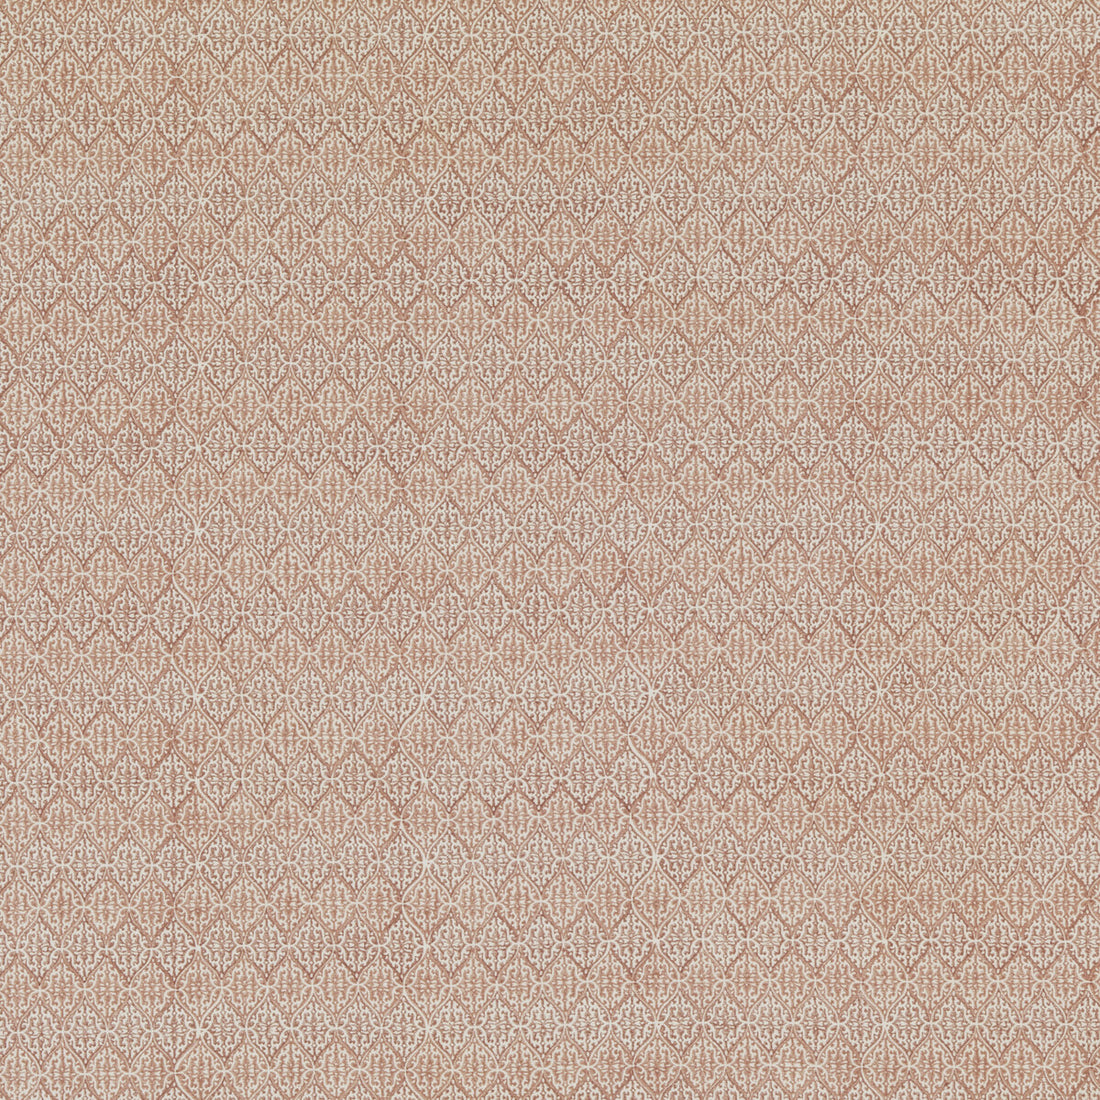 Tivington fabric in spice color - pattern BP10777.4.0 - by G P &amp; J Baker in the Signature Prints collection